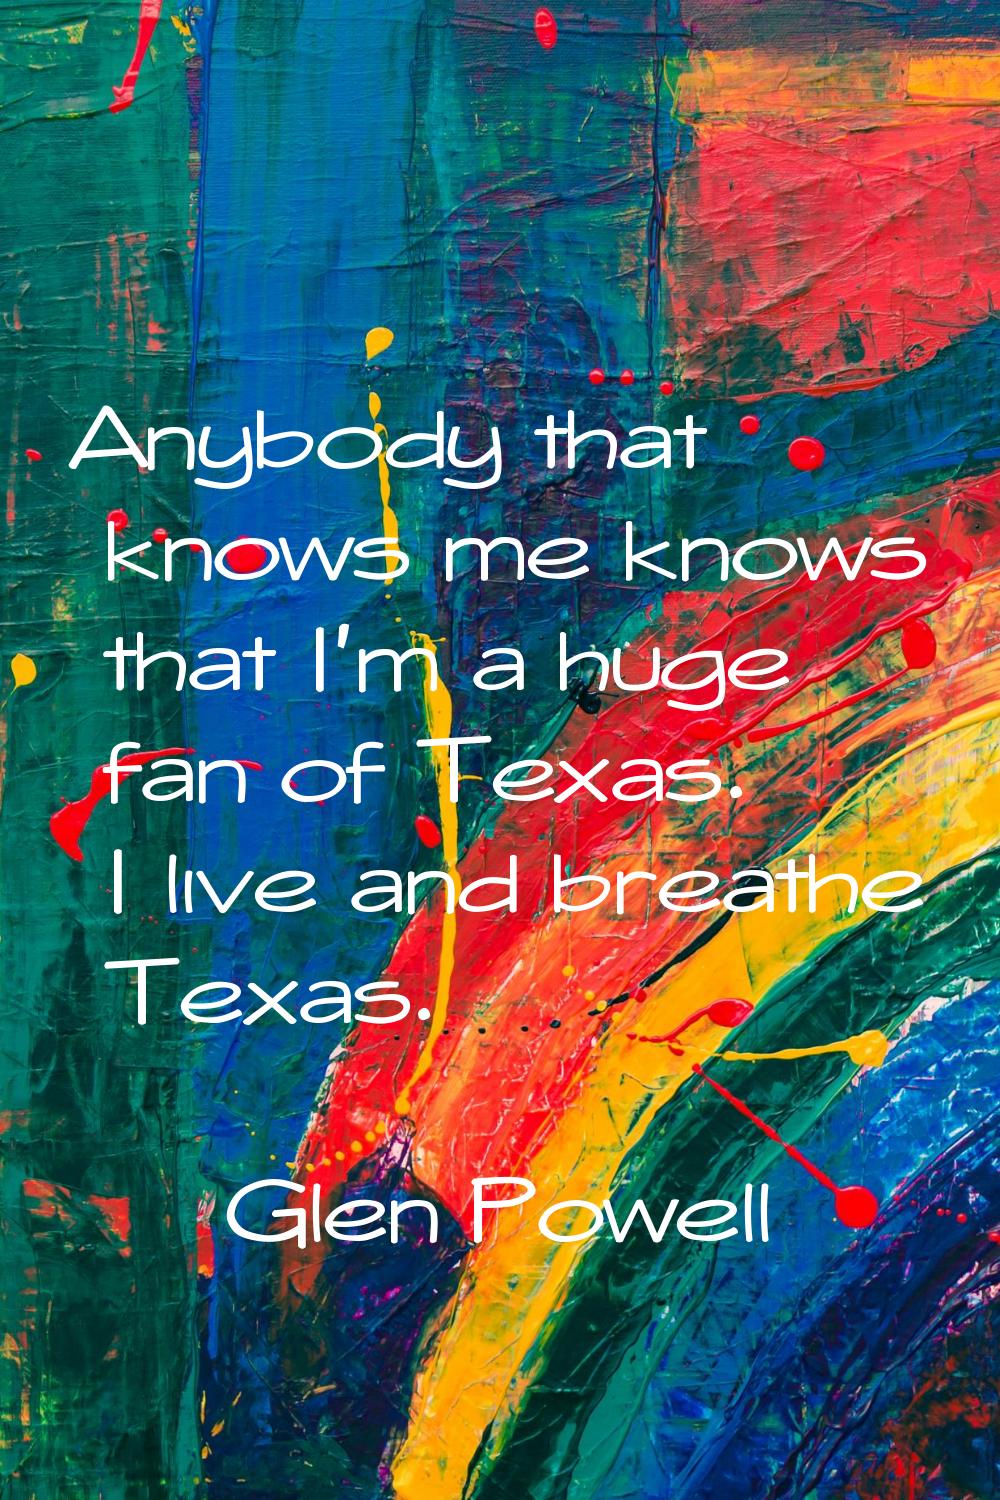 Anybody that knows me knows that I'm a huge fan of Texas. I live and breathe Texas.